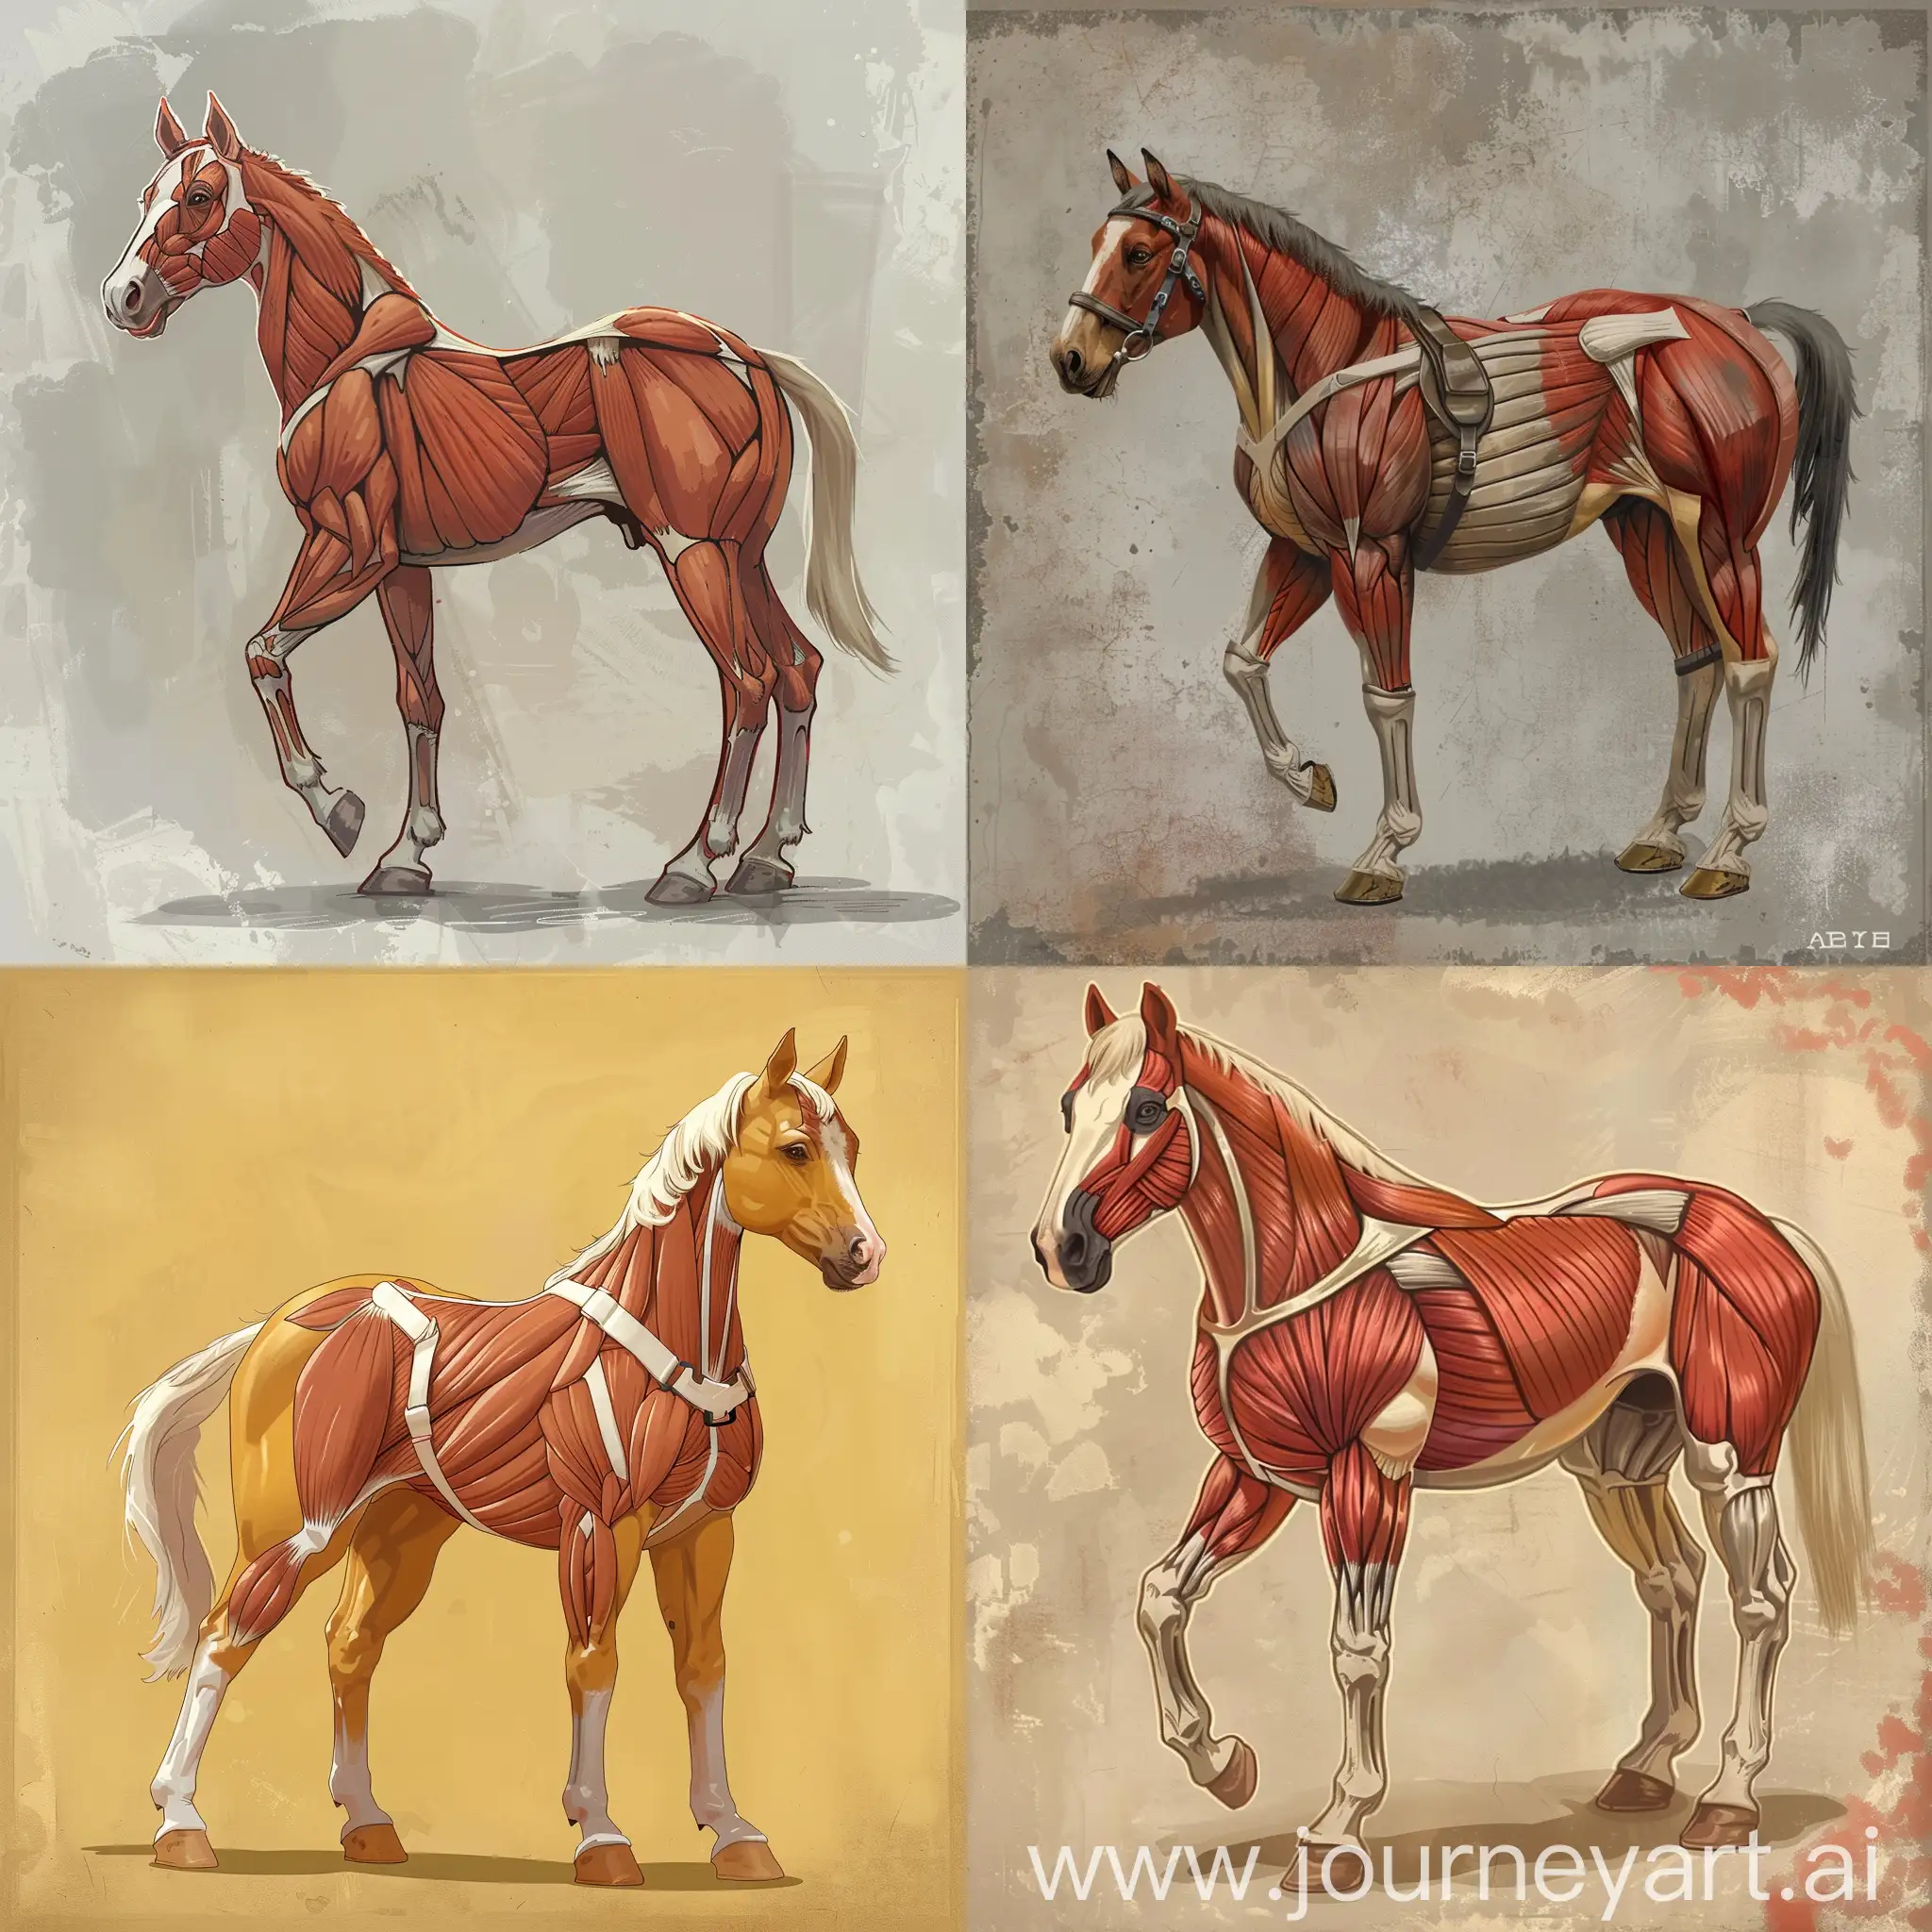 Anthro horse with muscles on the back